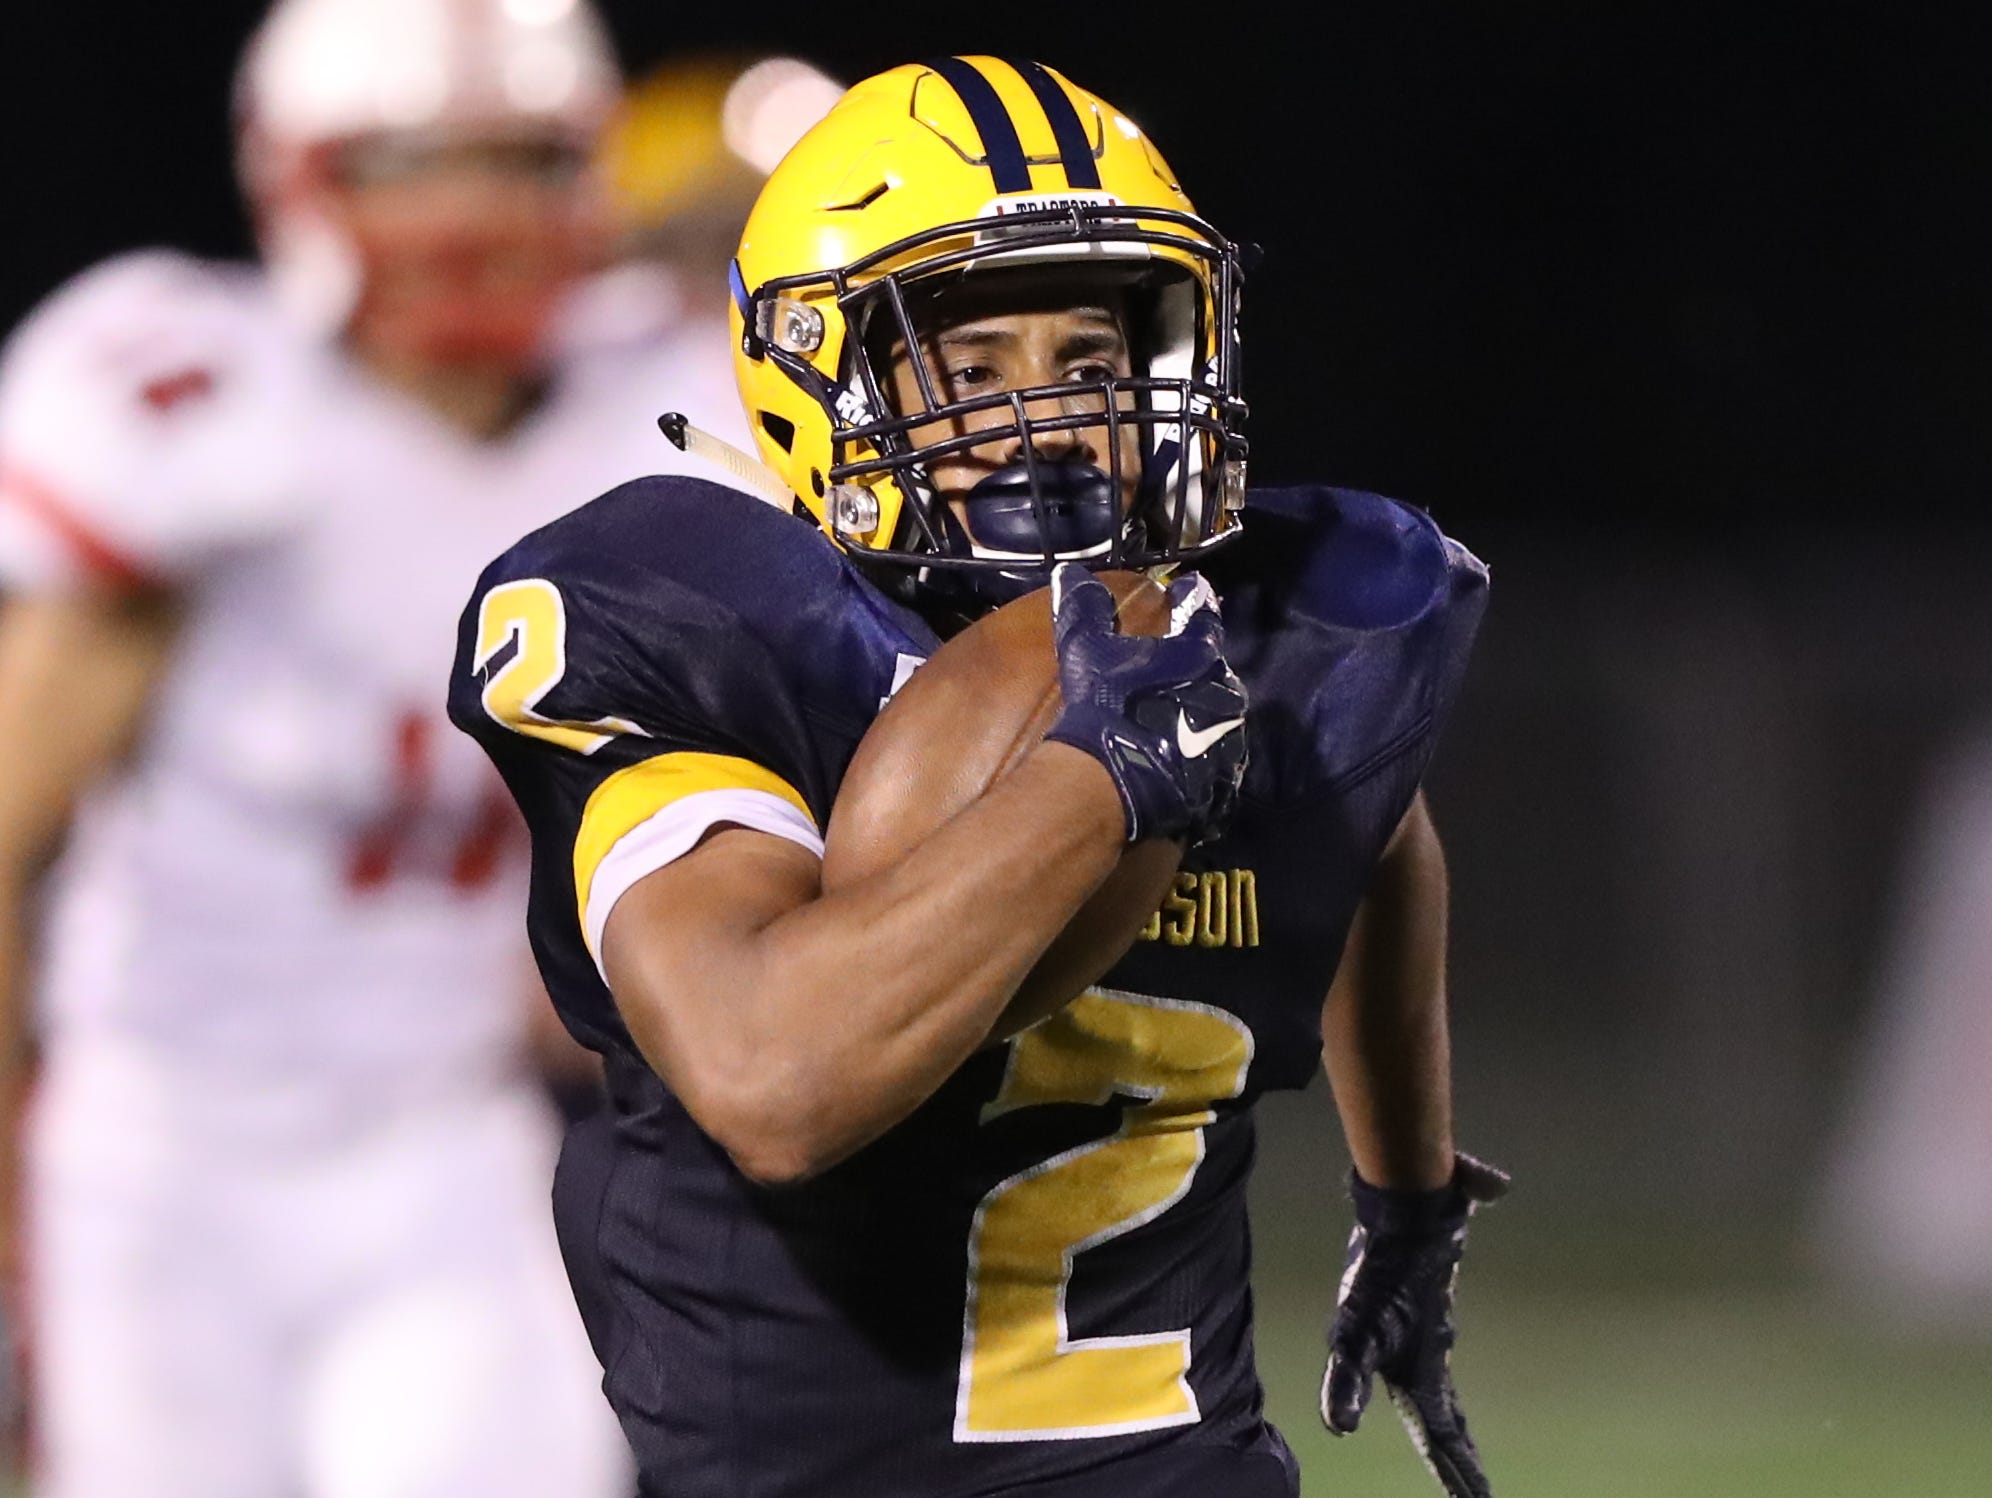 Dearborn Fordson's Aziz Alhanek runs the ball against Canton's during the second half of Fordson's 40-35 win Friday at Wayne State.